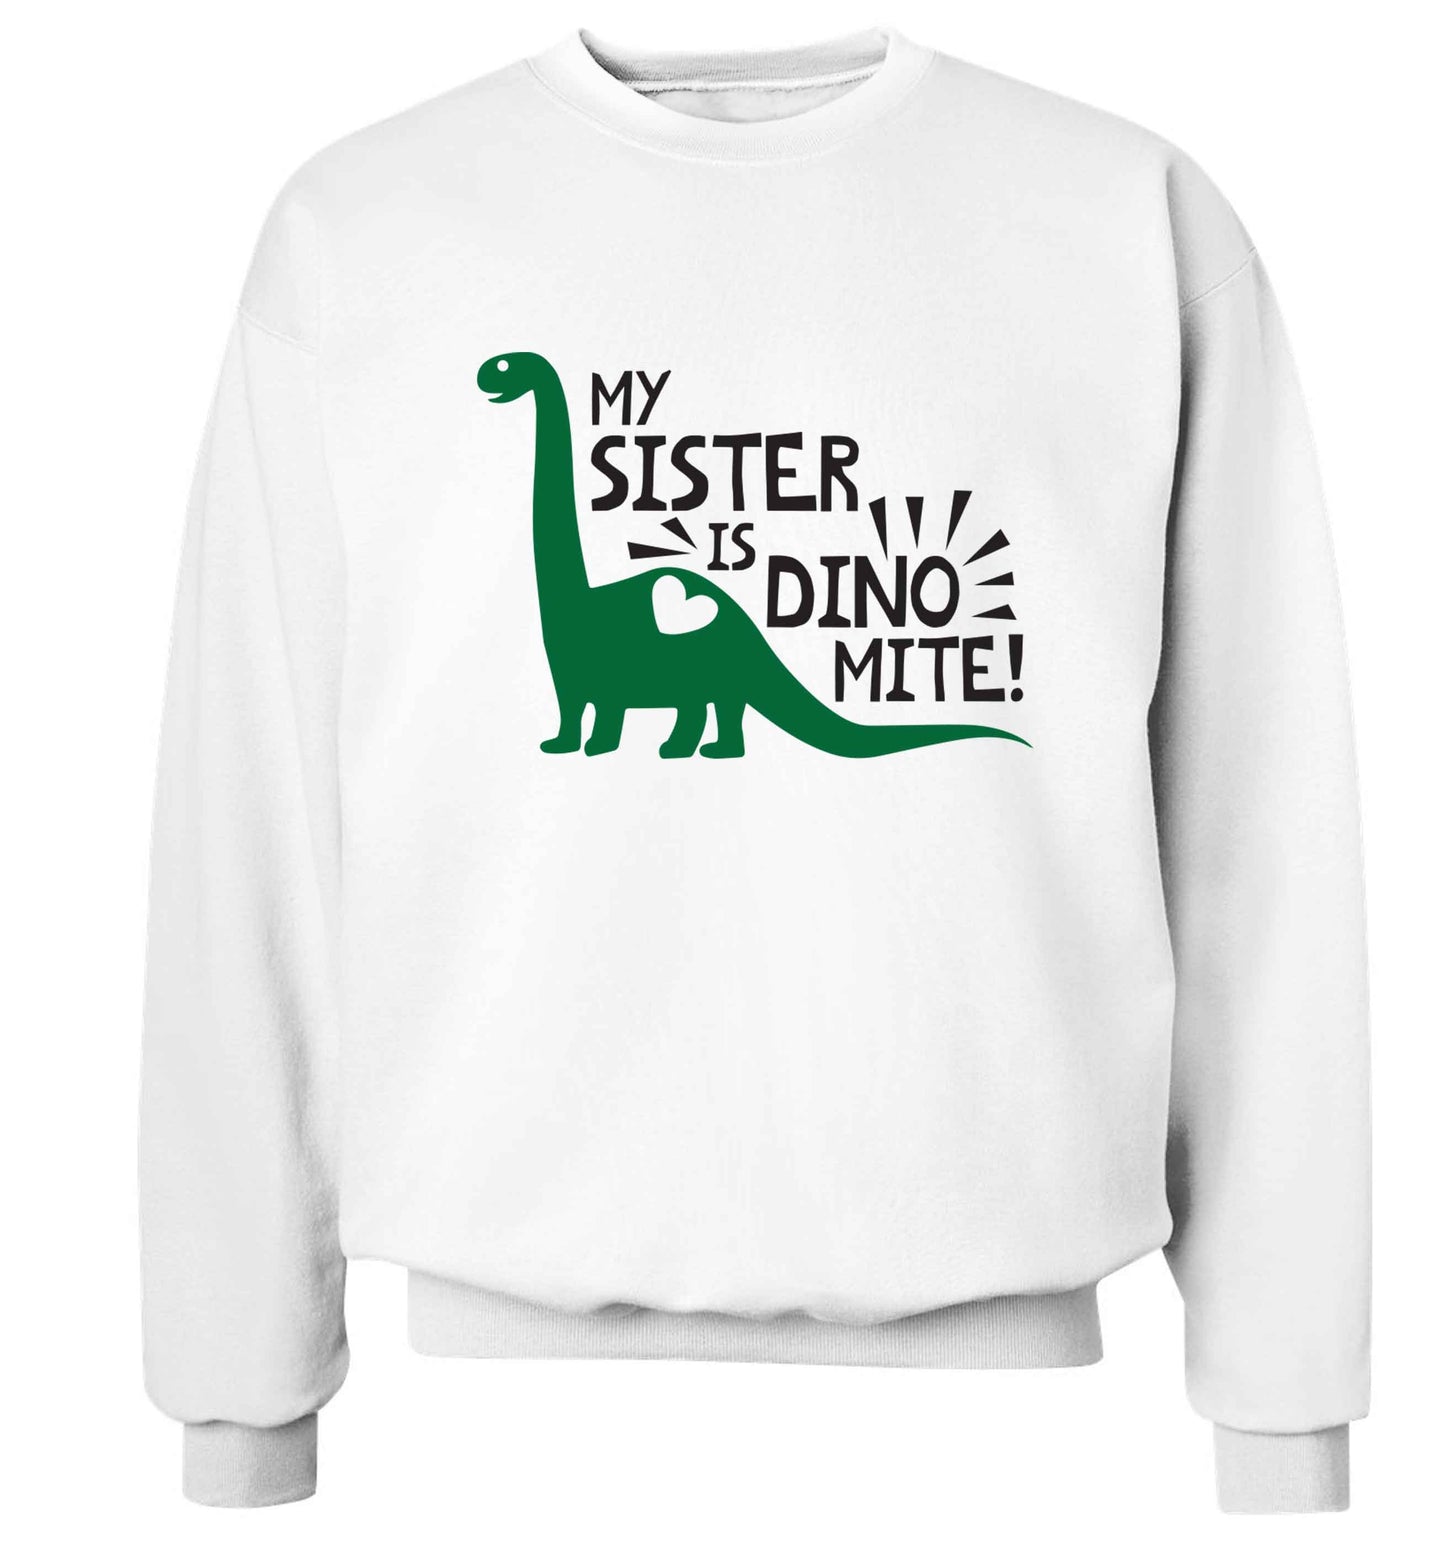 My sister is dinomite! Adult's unisex white Sweater 2XL